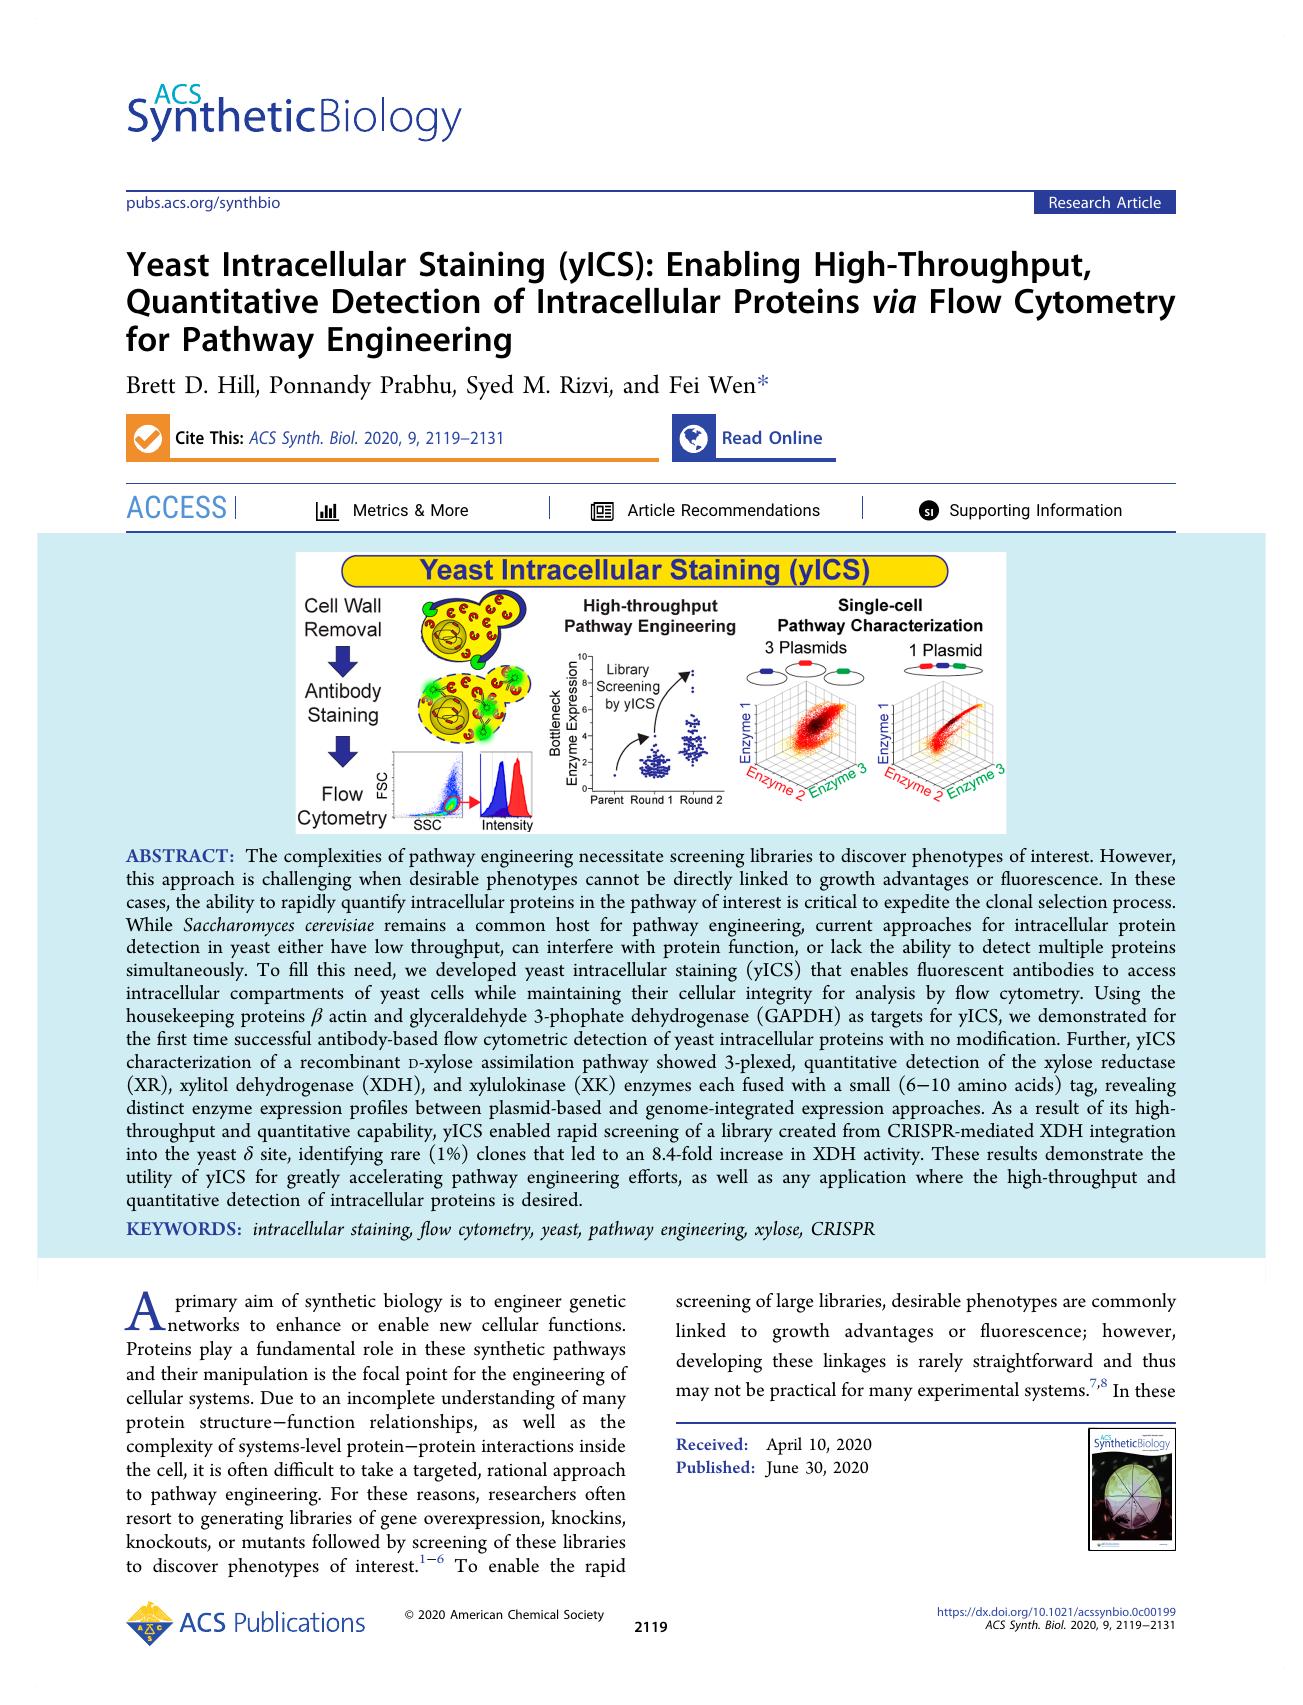 Yeast Intracellular Staining (yICS): Enabling High-Throughput, Quantitative Detection of Intracellular Proteins via Flow Cytometry for Pathway Engineering by Brett D. Hill Ponnandy Prabhu Syed M. Rizvi and Fei Wen